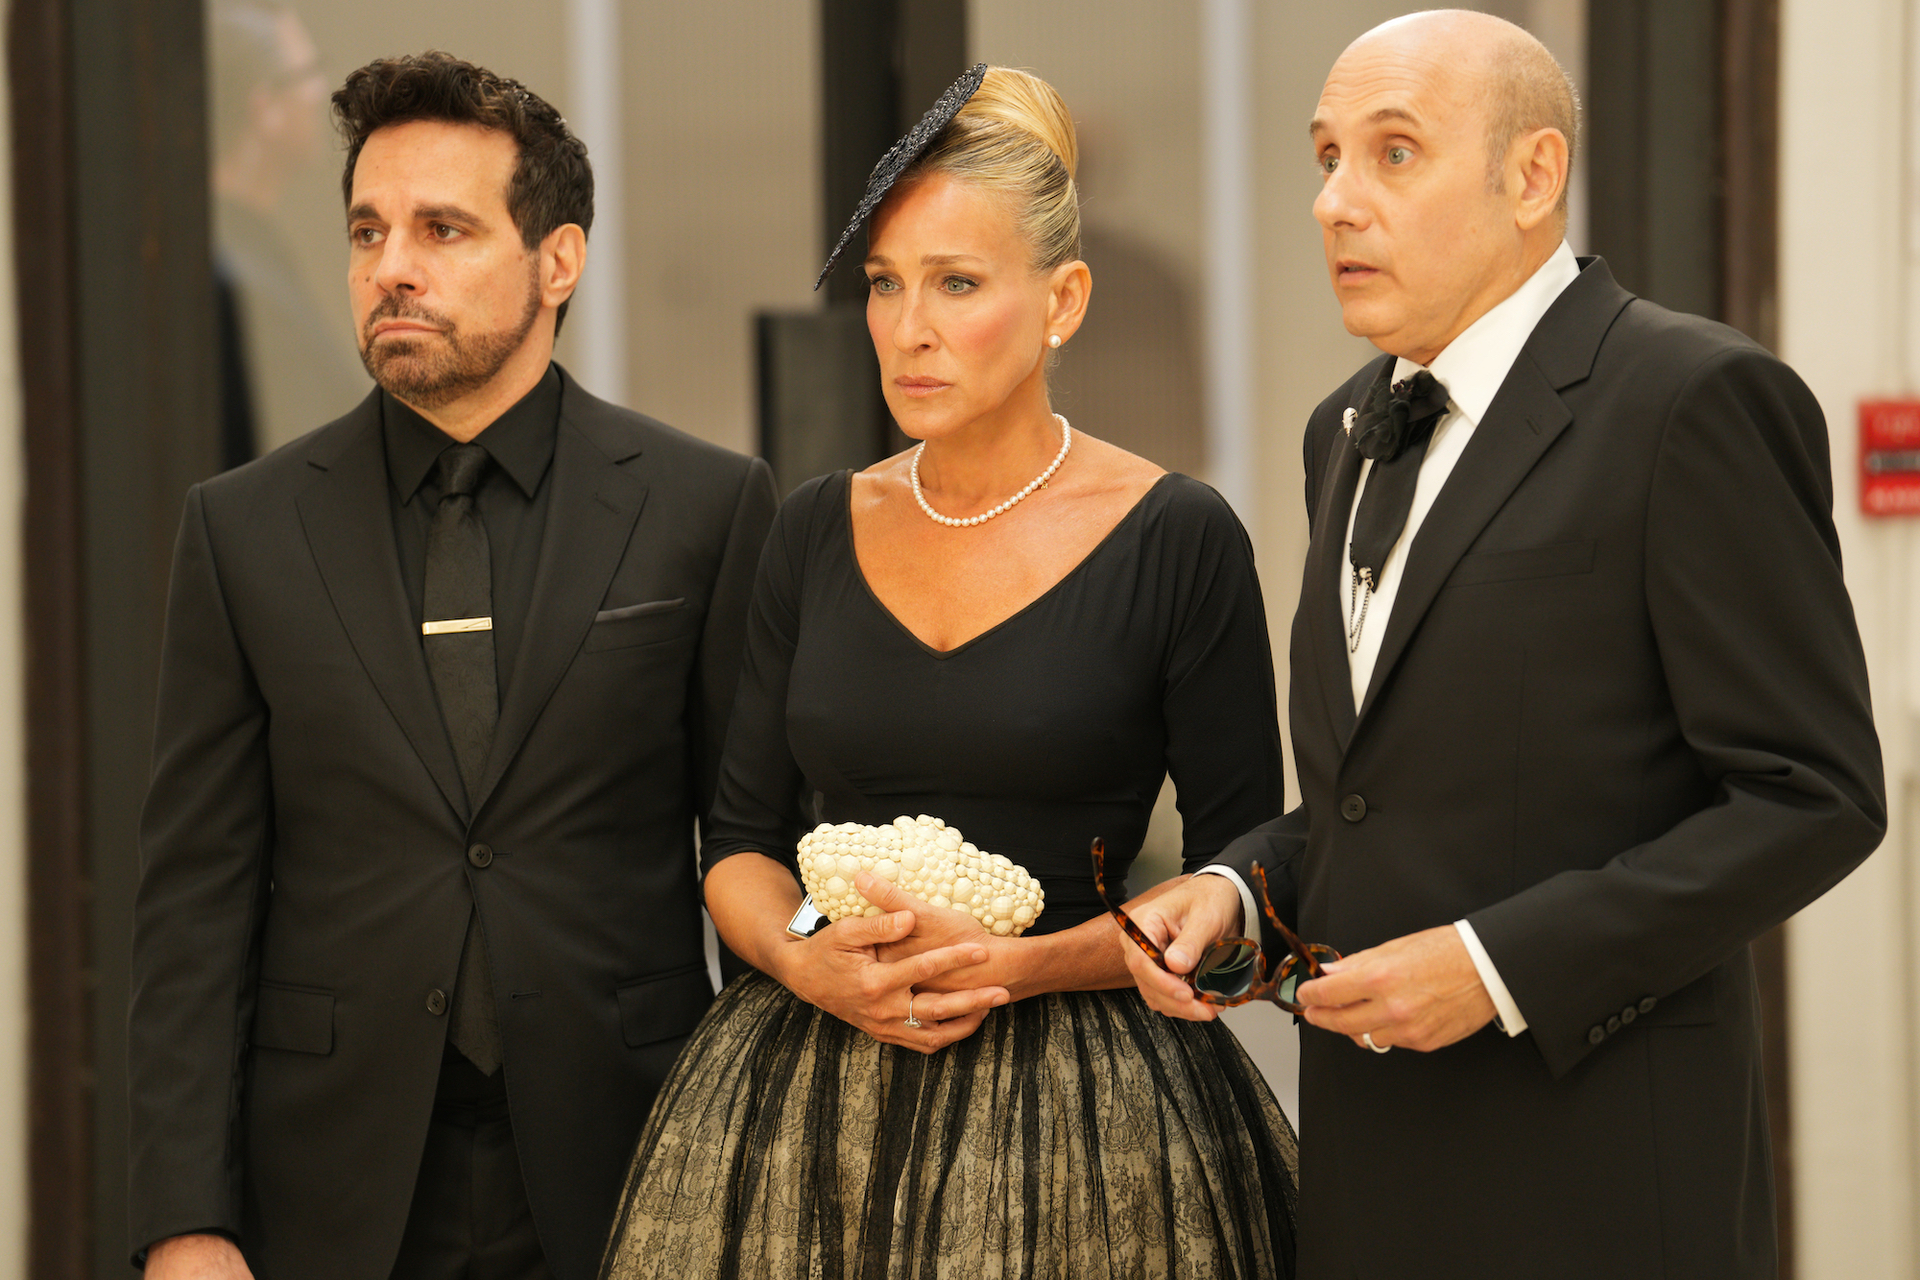 Mario Cantone, Sarah Jessica Parker, Willie Garson attend a certain someone's funeral on HBO Max series "And Just Like That..."